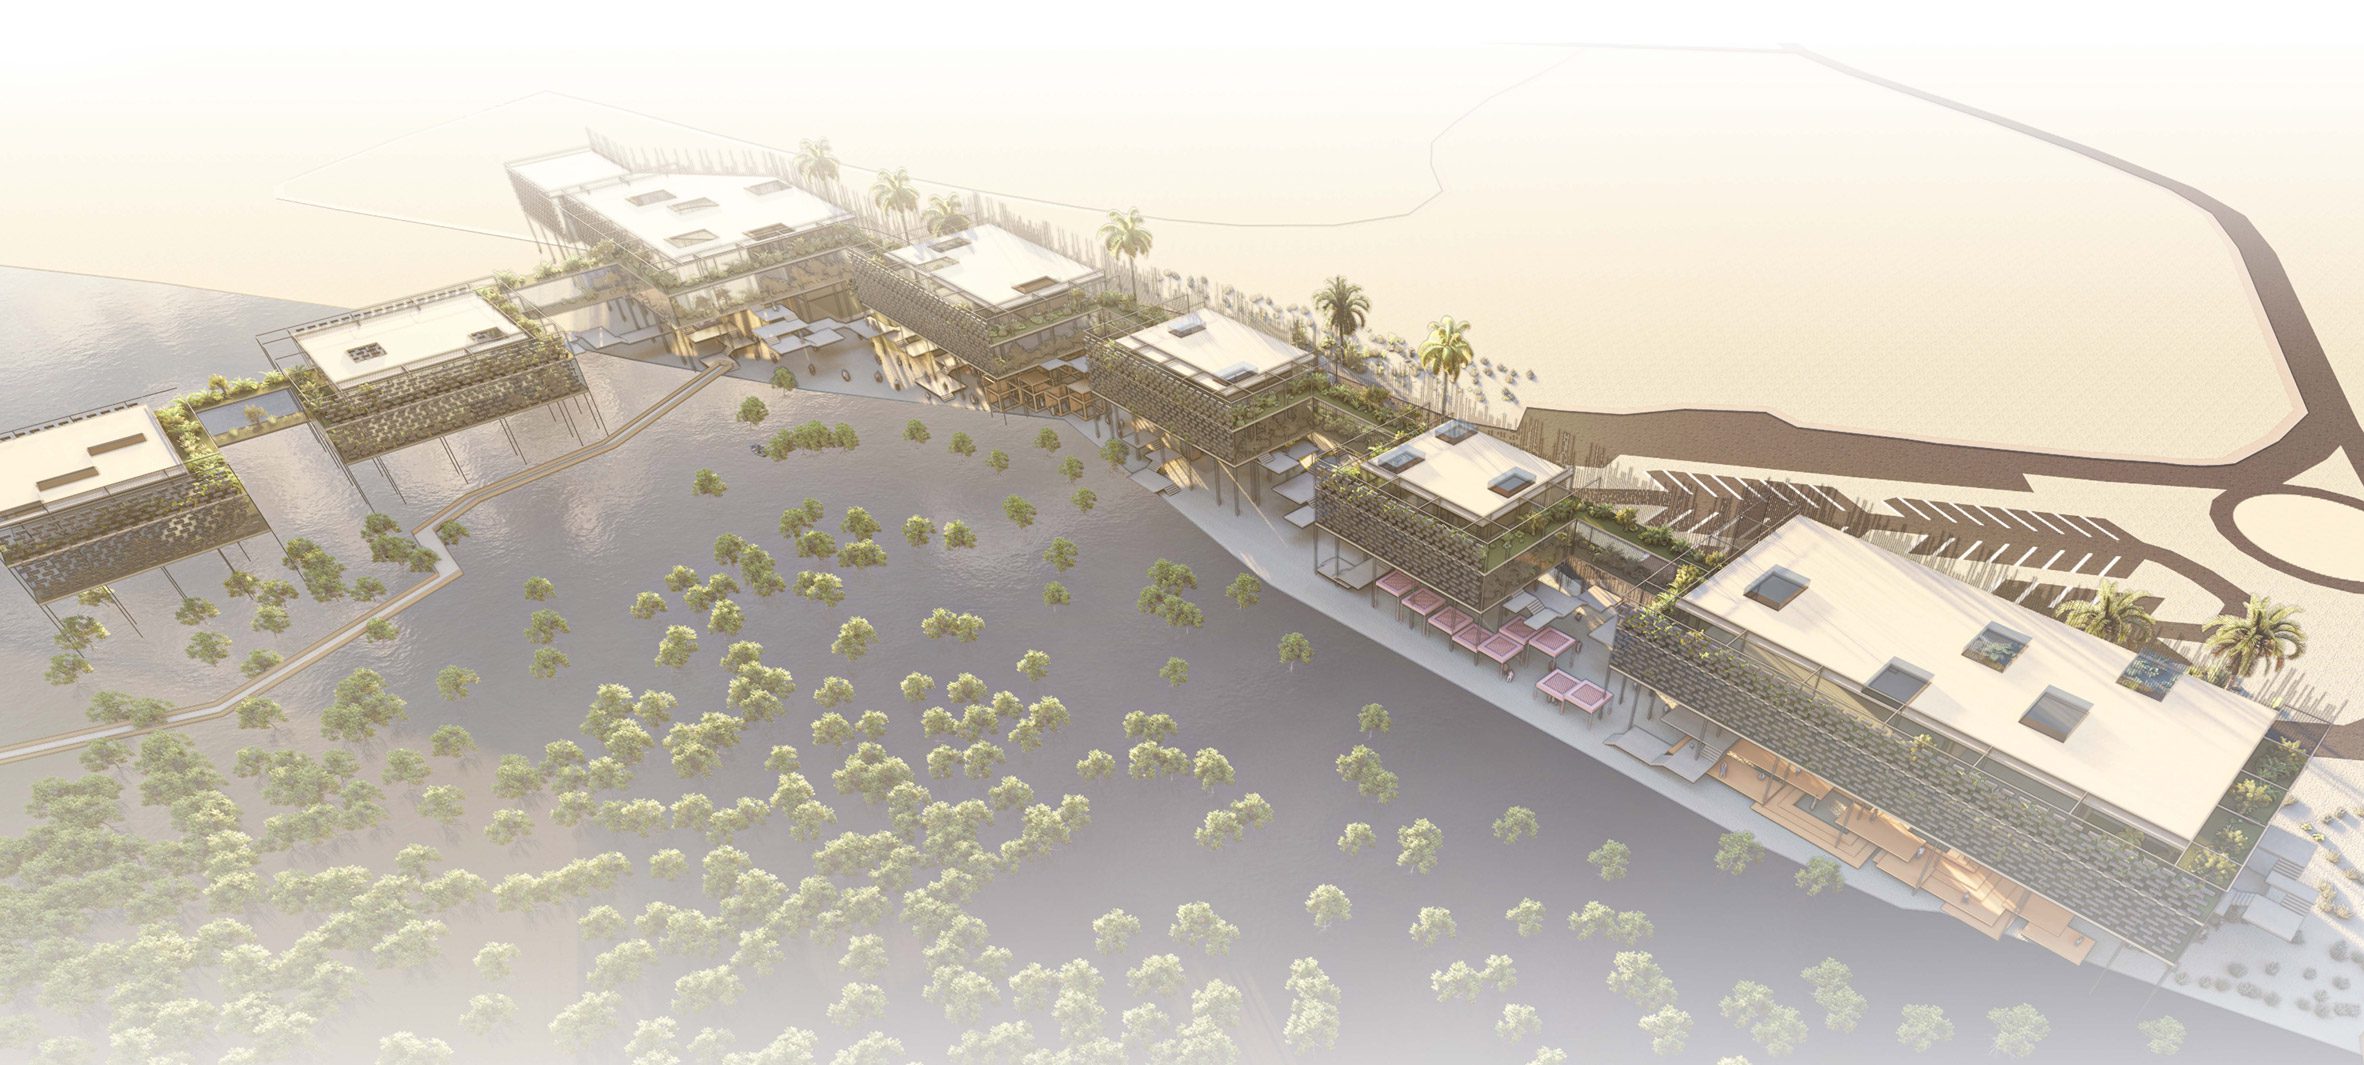 Visualisation of a multi-use centre situated between land and water